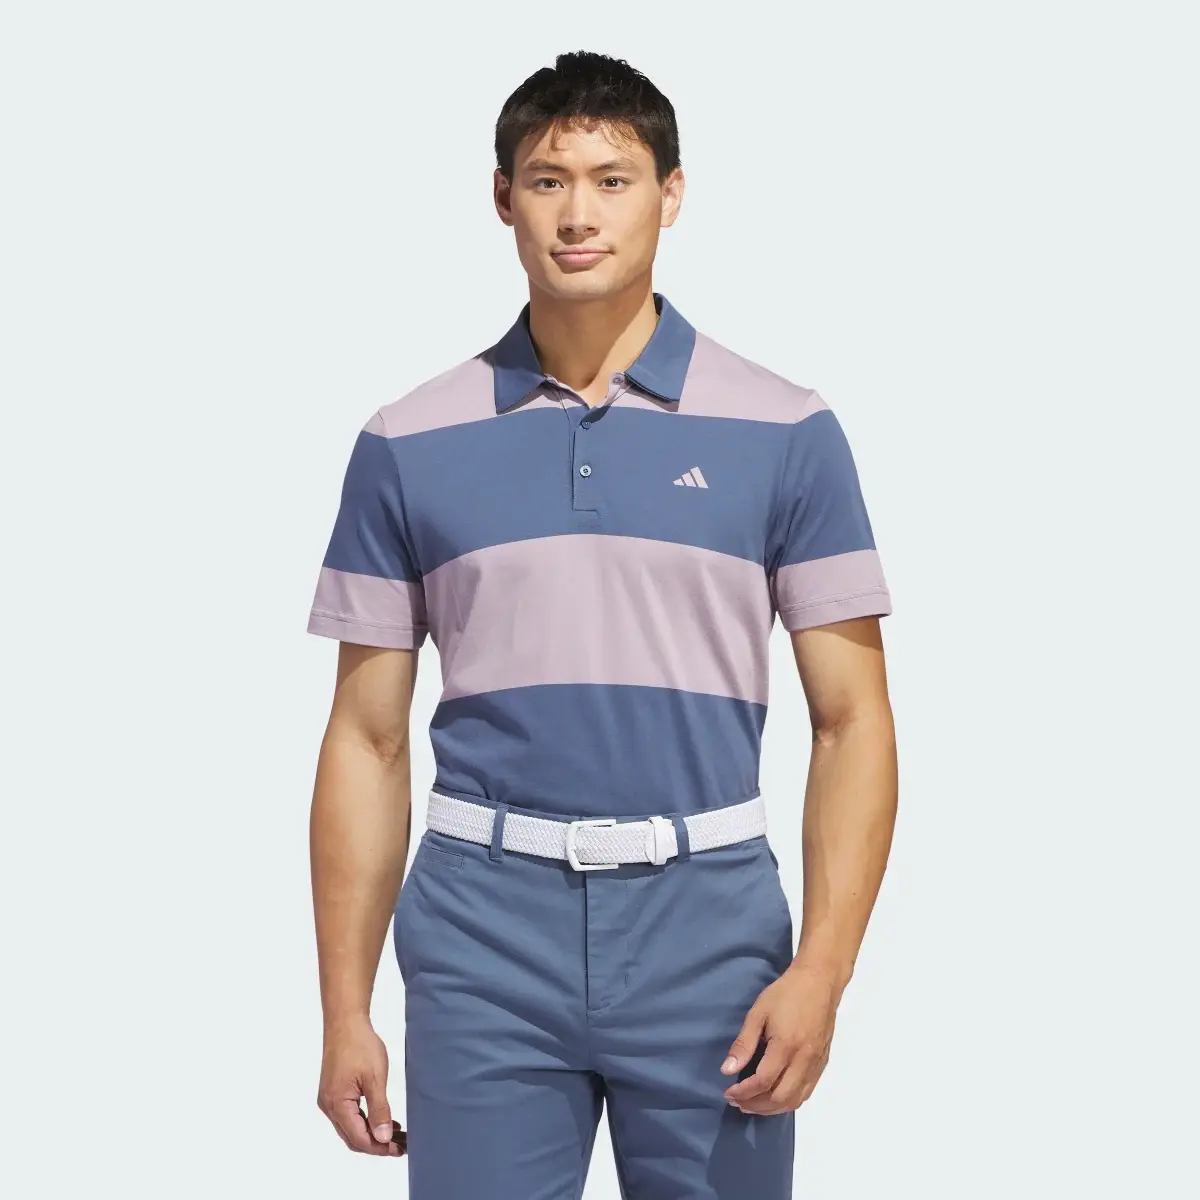 Adidas Colorblock Rugby Stripe Polo Shirt. 2